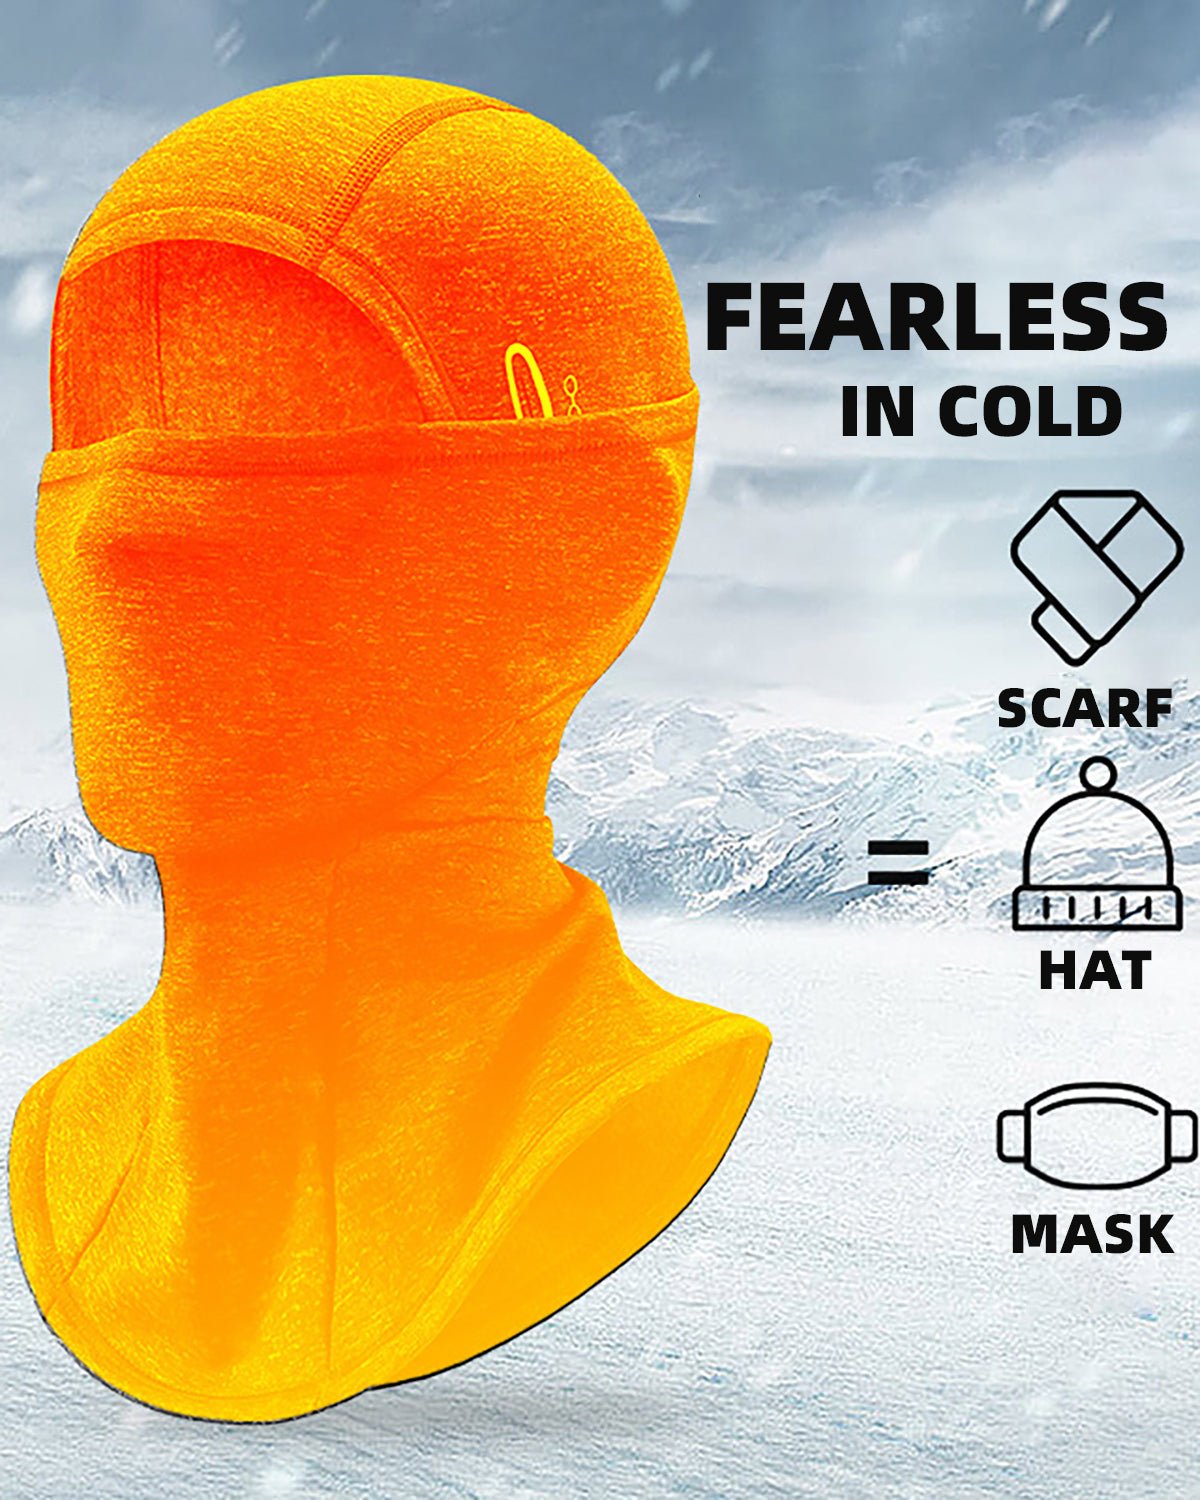 Ski Mask Winter Face Mask Cover Thermal Fleece Hood For Cycling Hiking Running Masks VICTGOAL accessories adultshelmets apparel